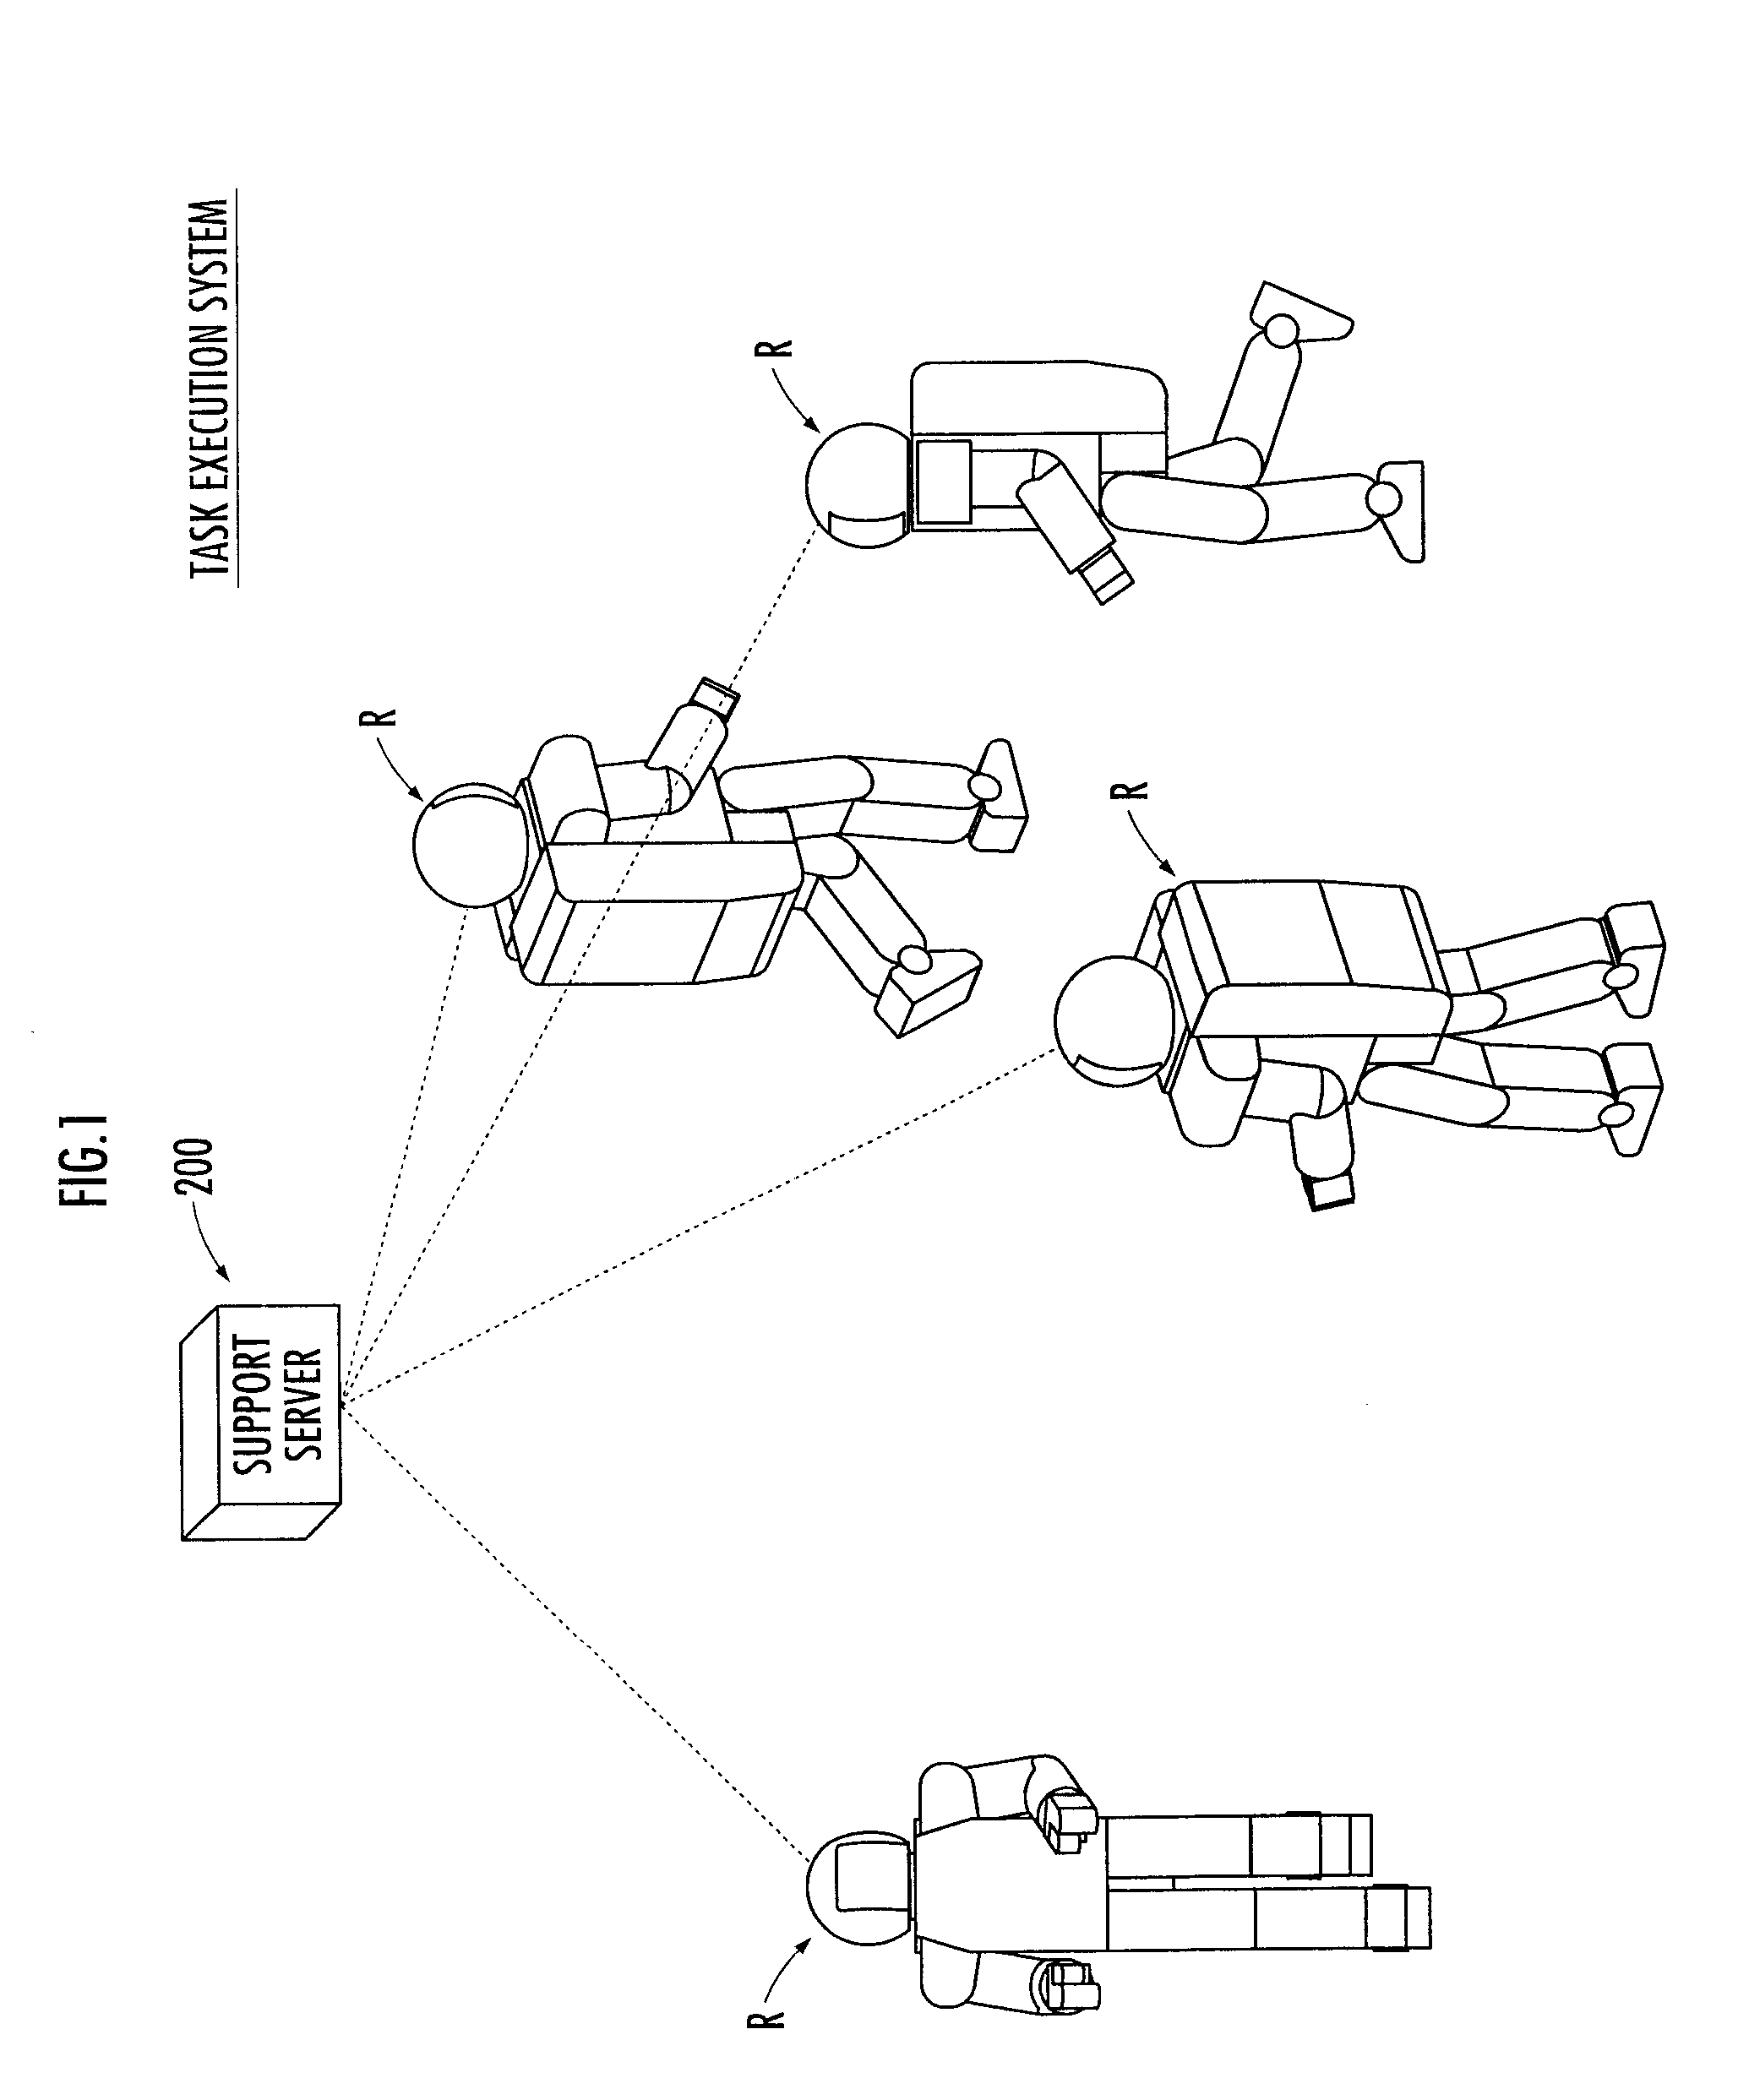 Robot and task execution system